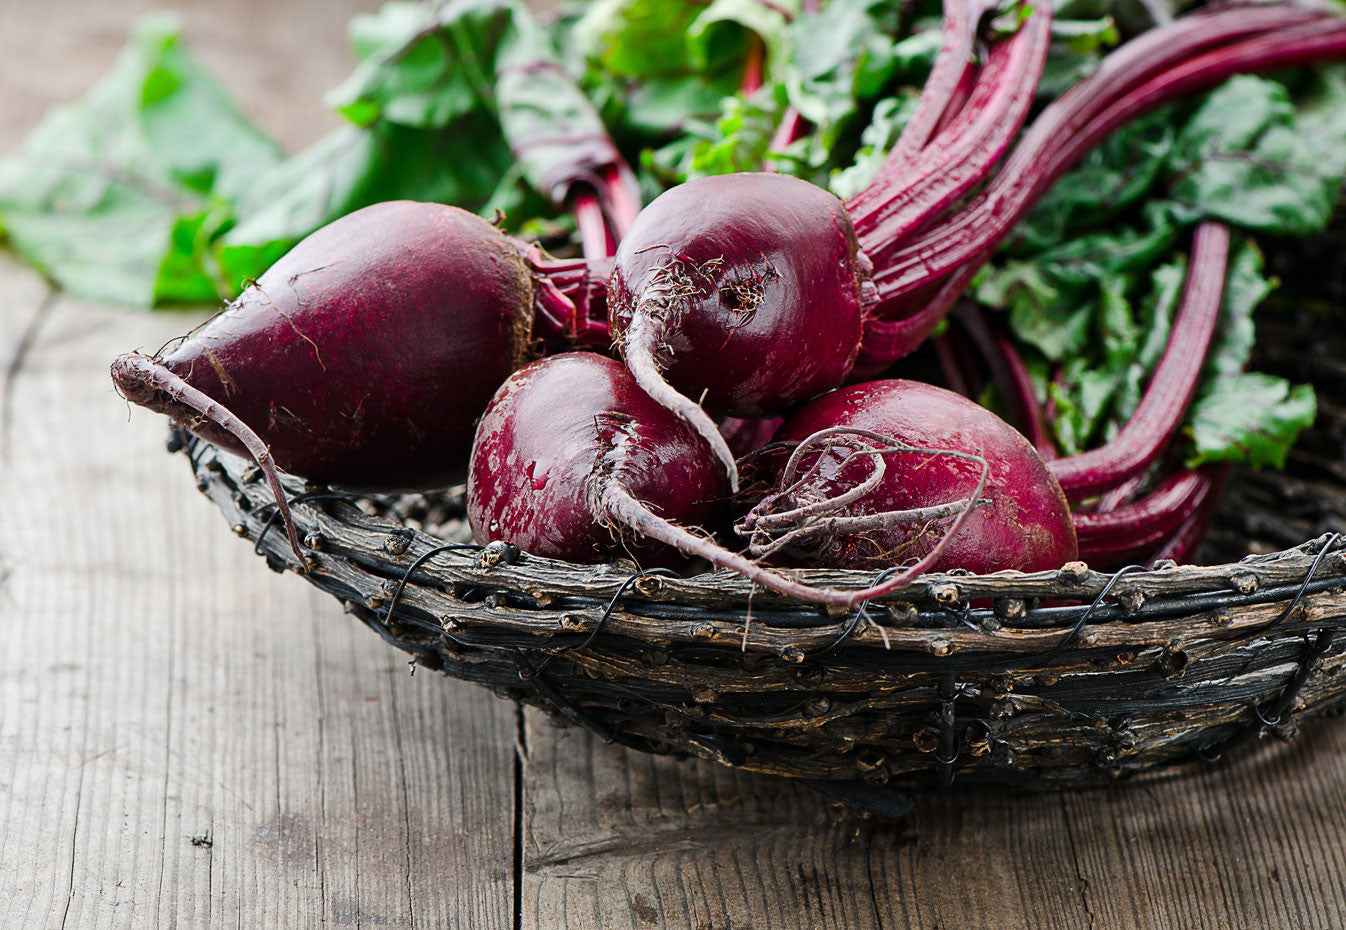 Recipes: Easiest Steamed Beets and Red Beet and Feta Salad